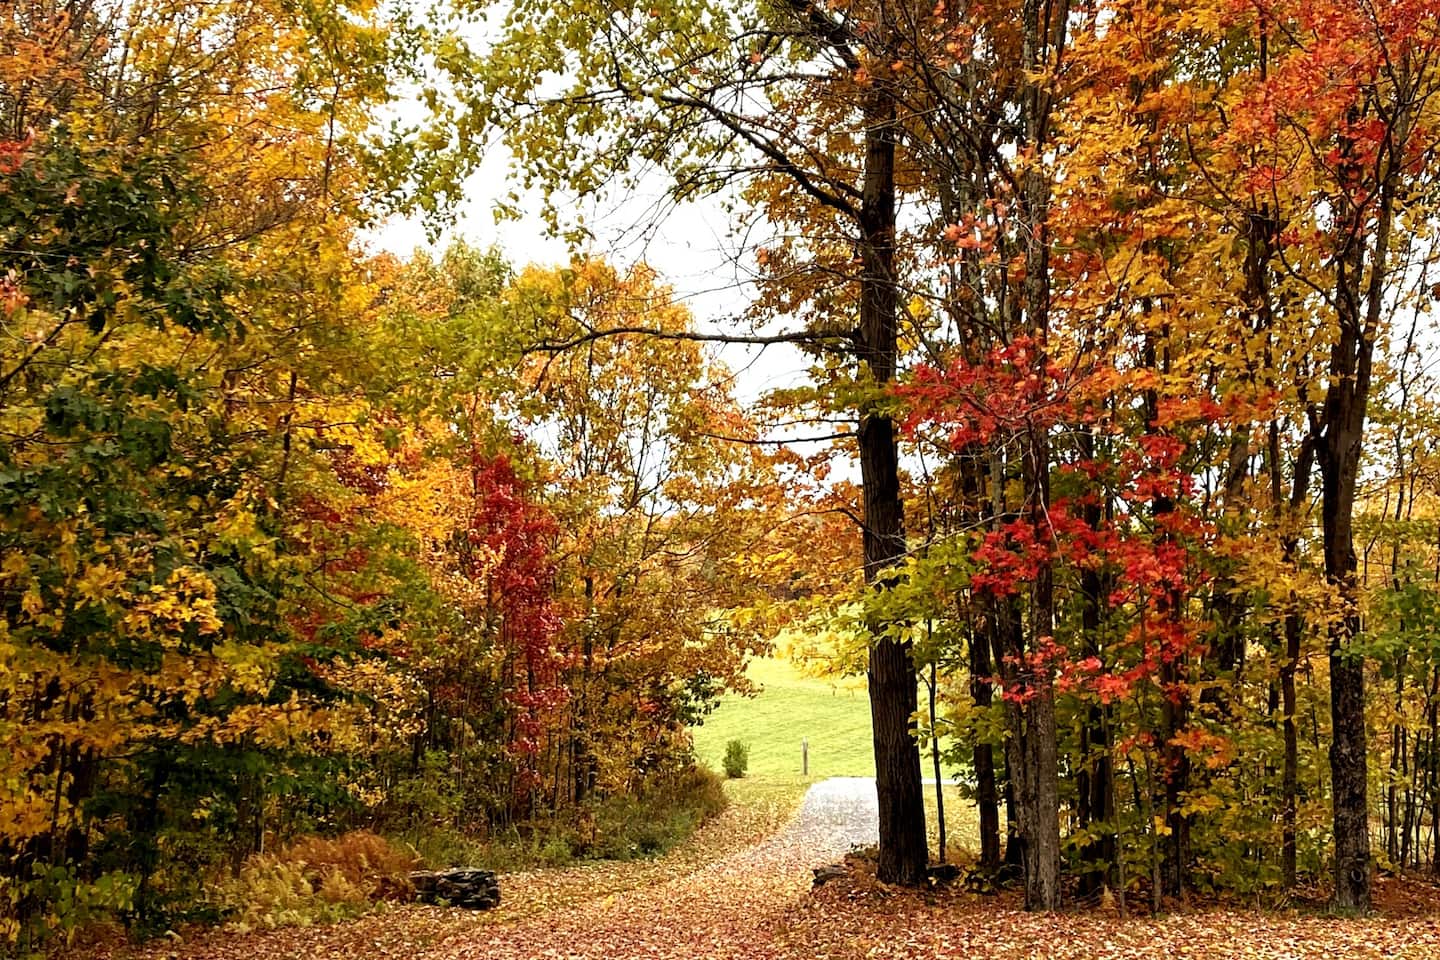 Autumn colors can be breath taking! This is looking down the driveway.